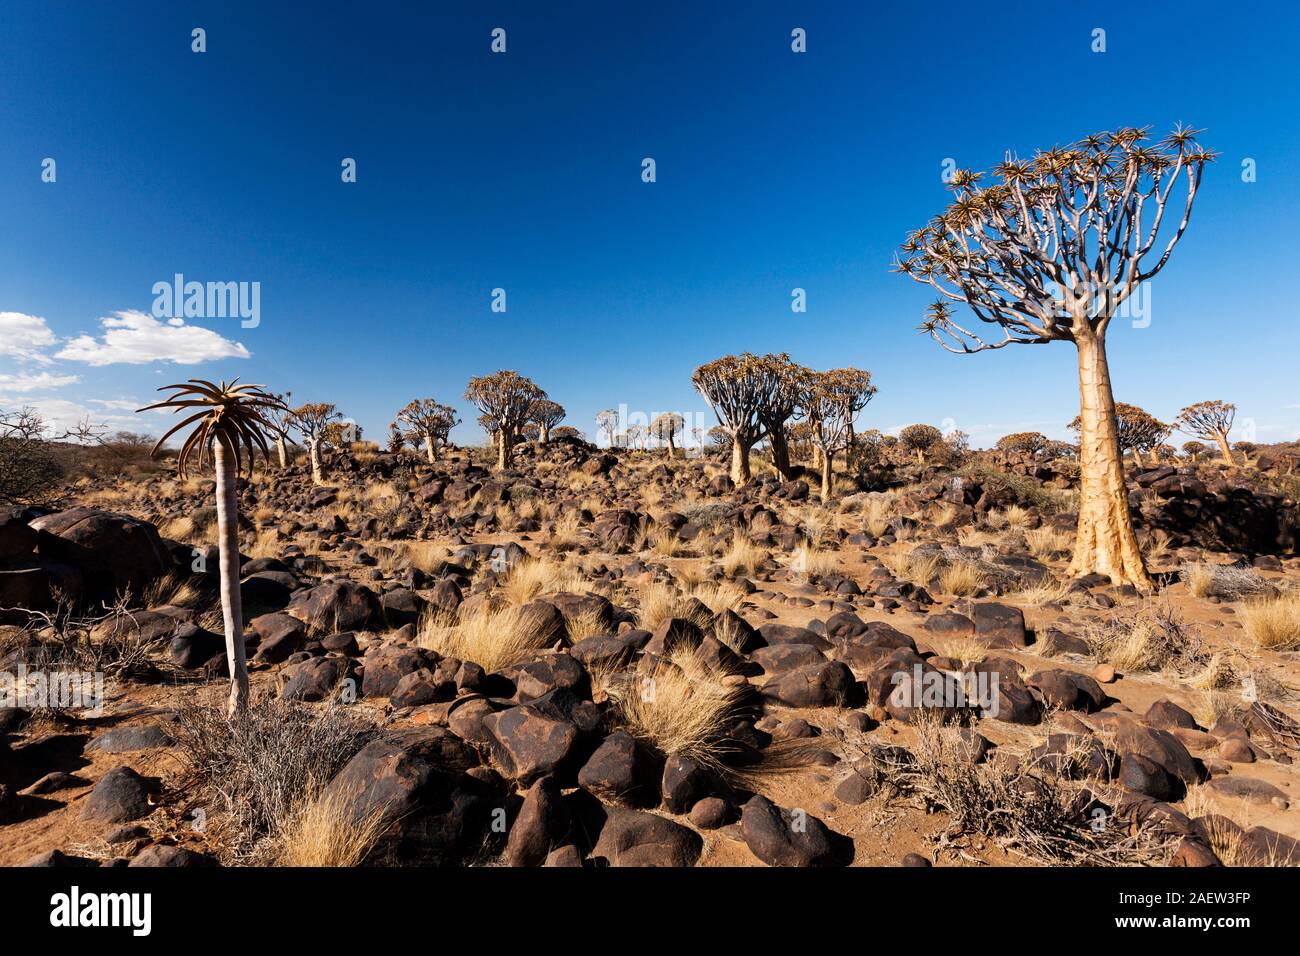 Quiver Tree Forest, Aloe dichotoma, giant succulent plant, early morning, Keetmanshoop, Karas Region, Namibia, Southern Africa, Africa Stock Photo